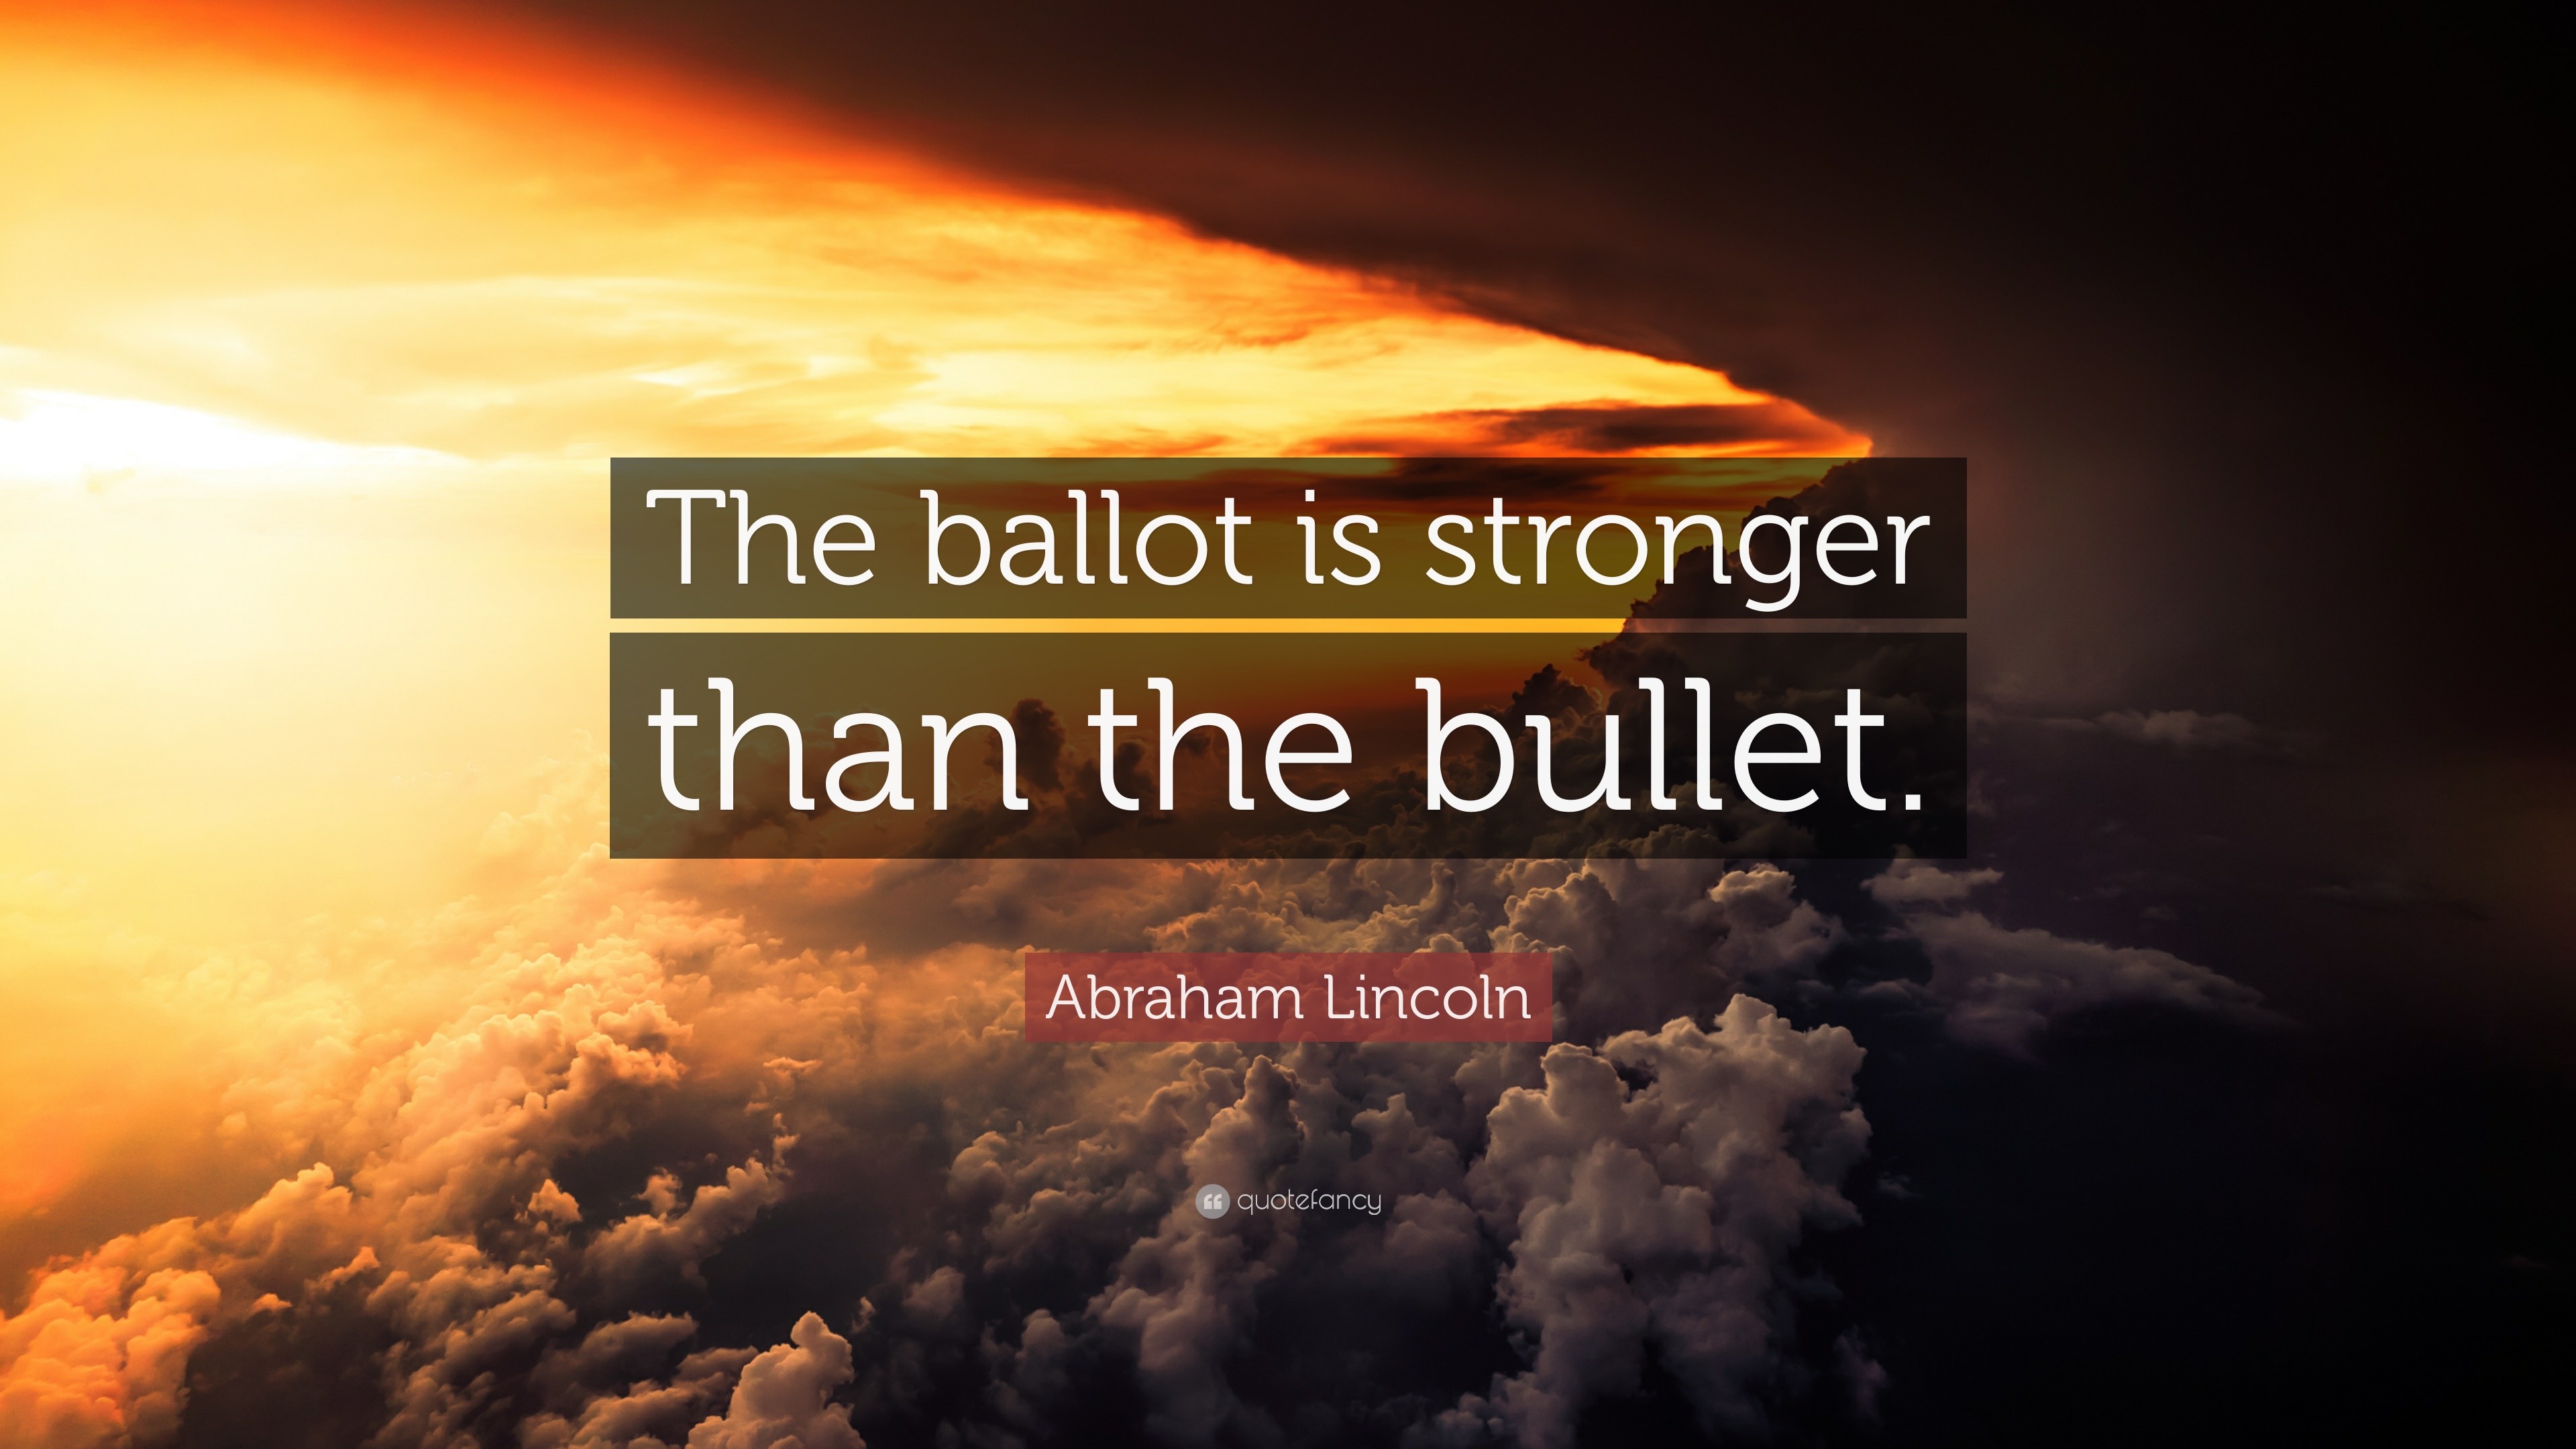 Abraham Lincoln Quotes (100 wallpapers) - Quotefancy